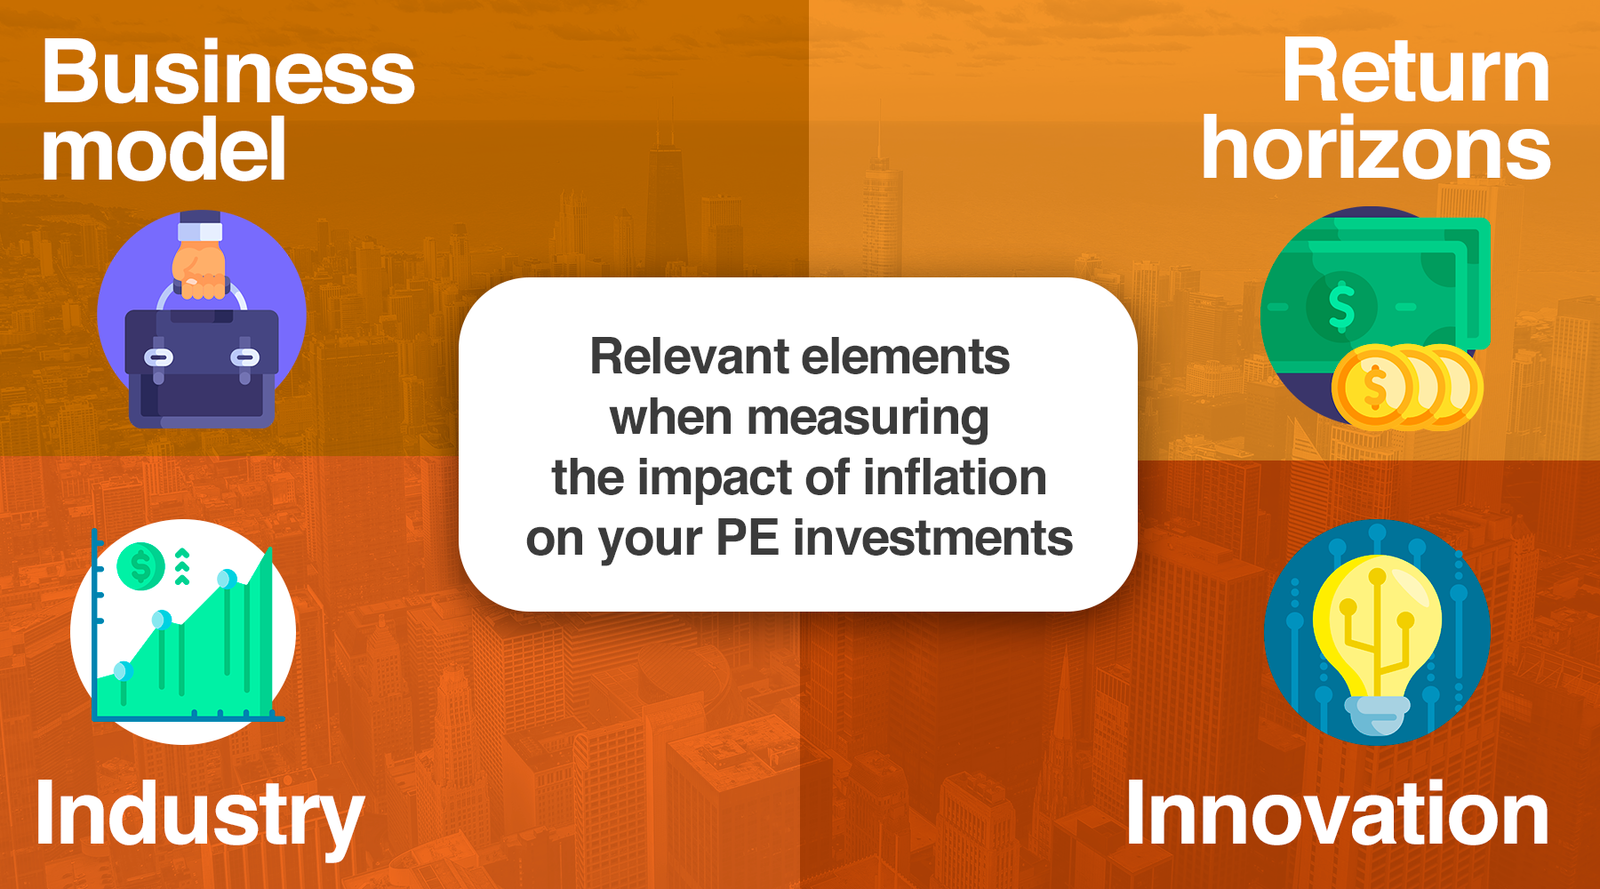 Relevant elements when measuring the impact of inflation on your PE investments